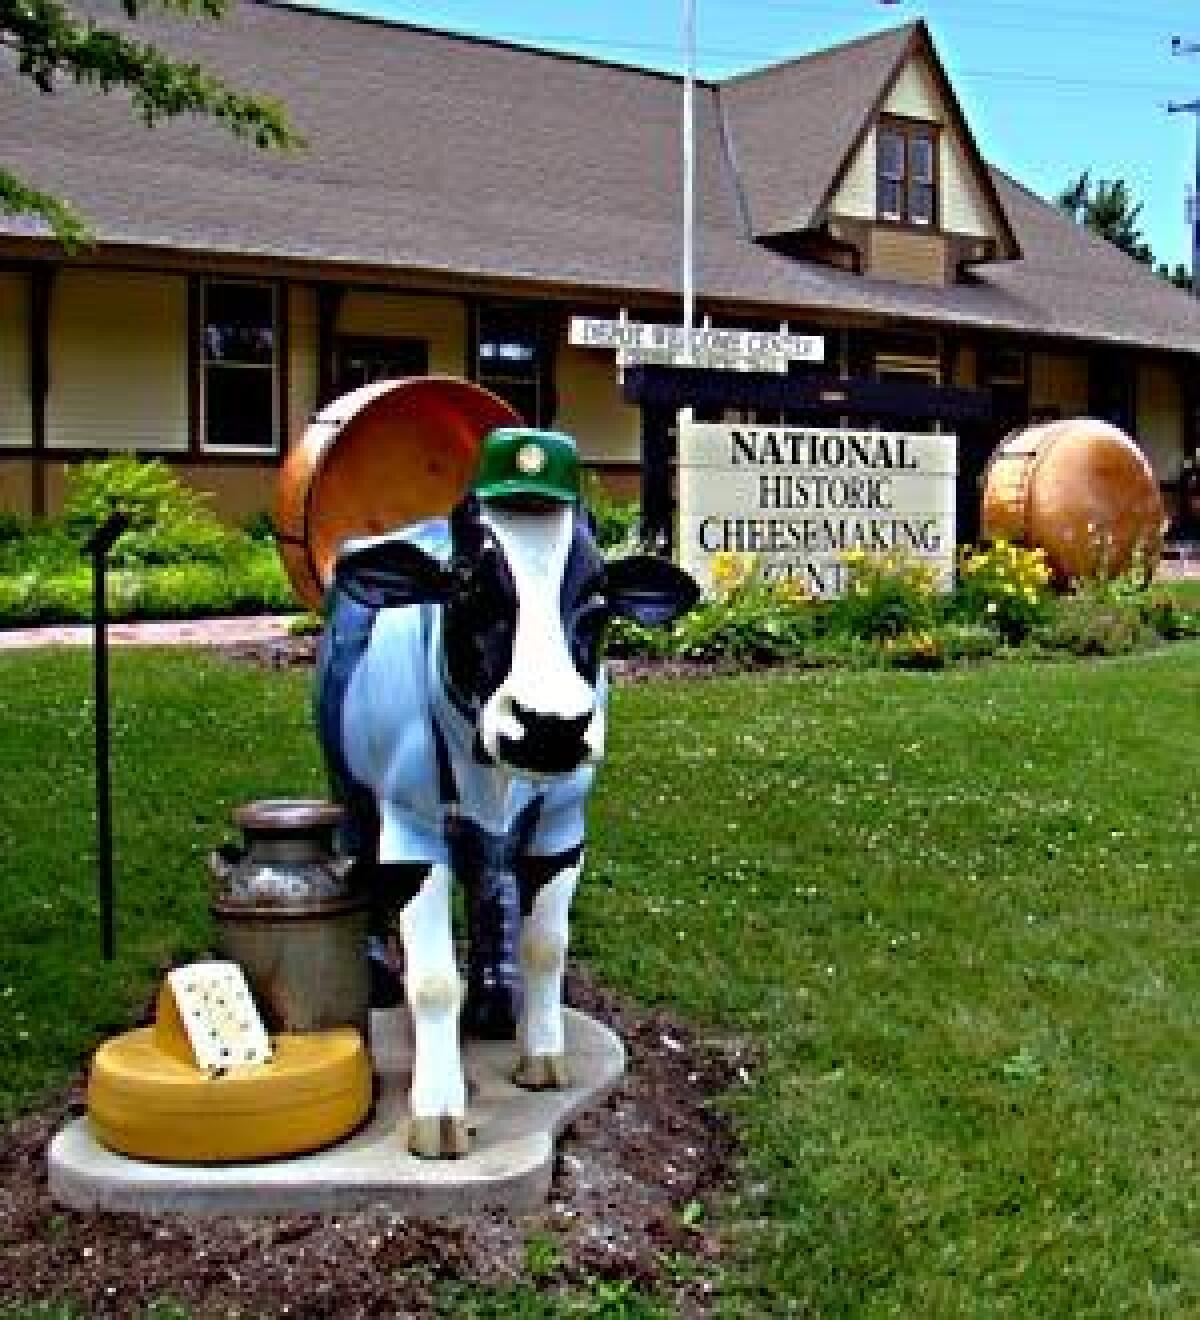 A MOOVING EXPERIENCE: A cow replica welcomes visitors to the National Historic Cheesemaking Center in Monroe, Wis.